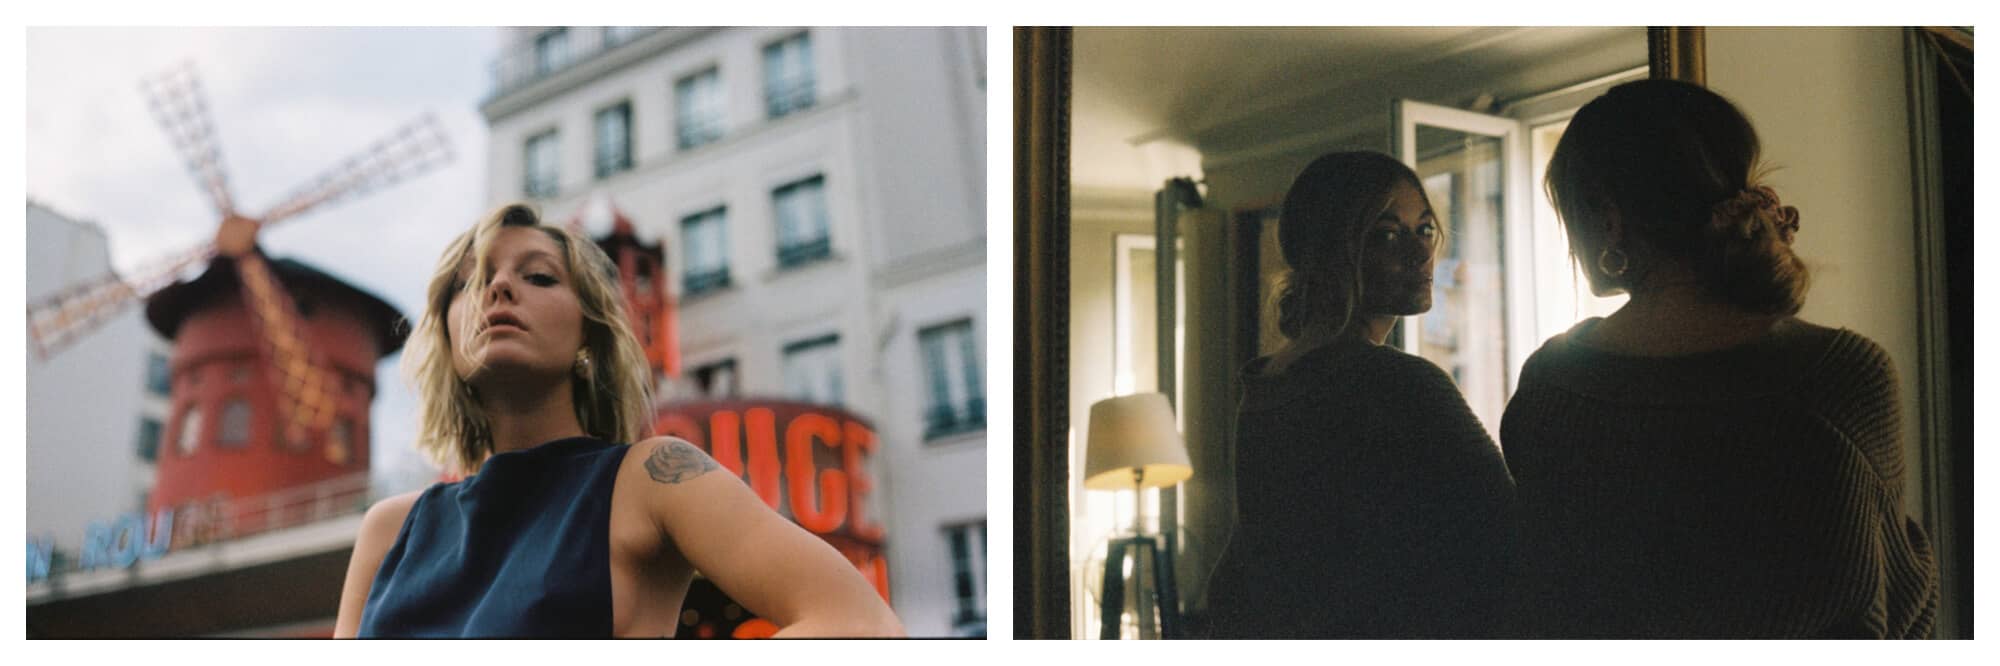 Left: a girl in front of the Moulin Rouge in Paris. She has blonde hair and is wearing a high neck, sleeveless top or dress. She has a tattoo on her shoulder. Right: a girl looking in the mirror of a Parisian apartment. Her blonde hair is in a bun and she wears a gold hoop hearing. 